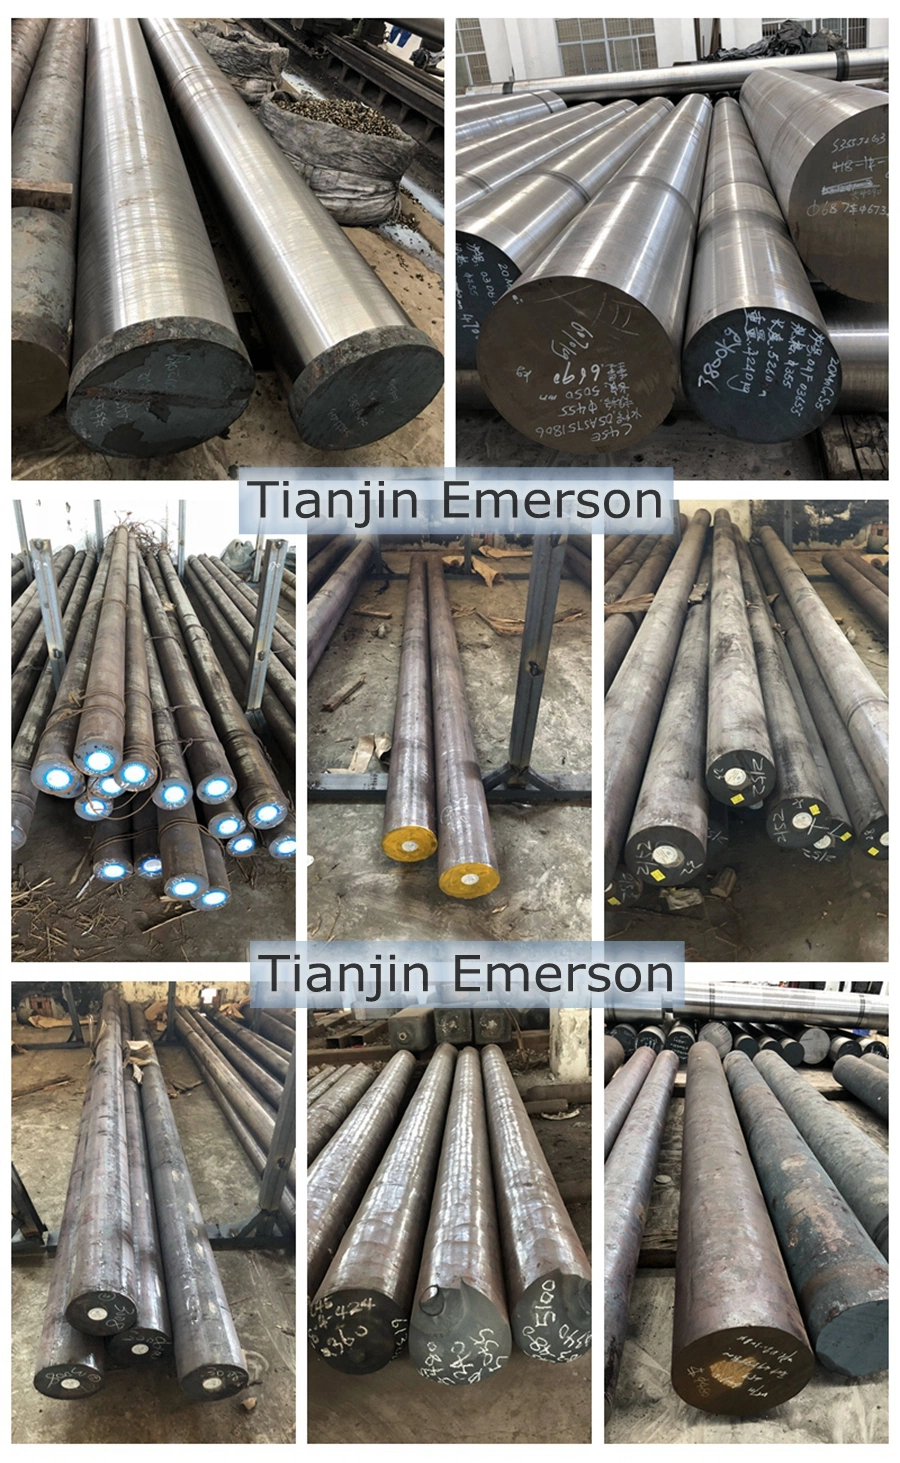 High Quality High Tensile and High Elongation Carbon Steel Round Bar